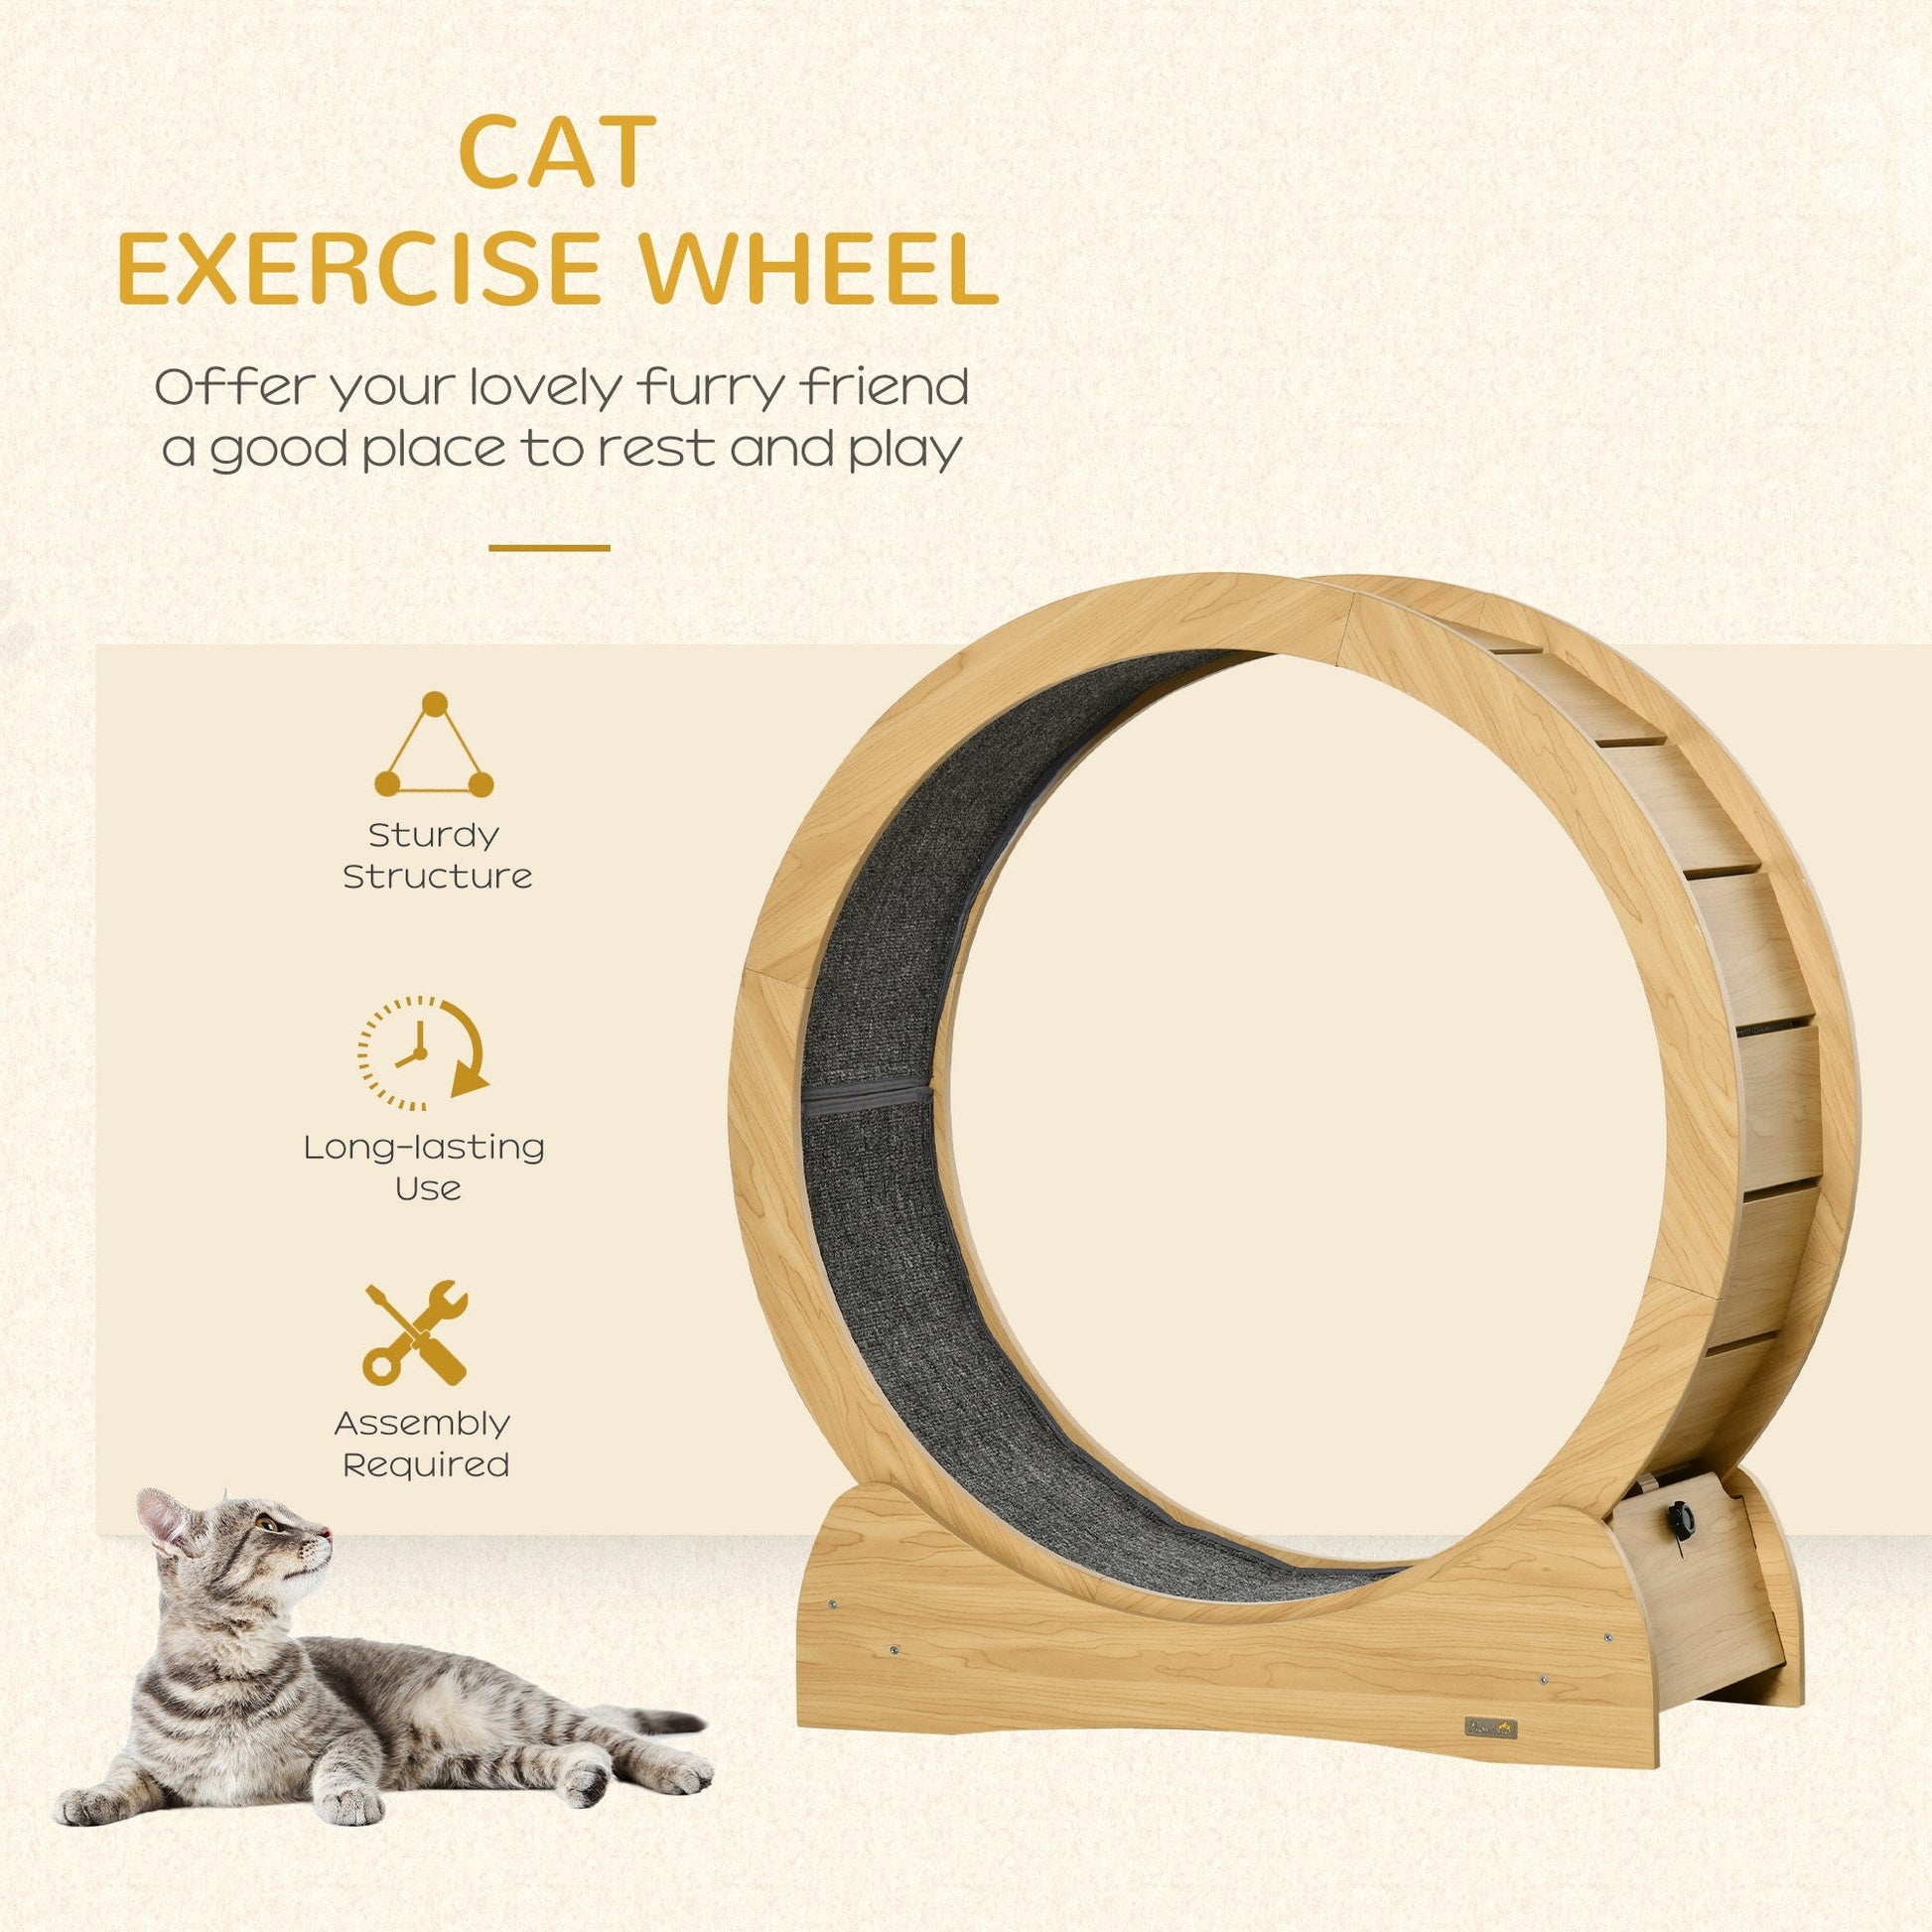 Cat Running Wheel, Cat Exercise Treadmill with Brake, Carpeted Runaway, Pet Fitness Weight Loss Device, Natural at Gallery Canada